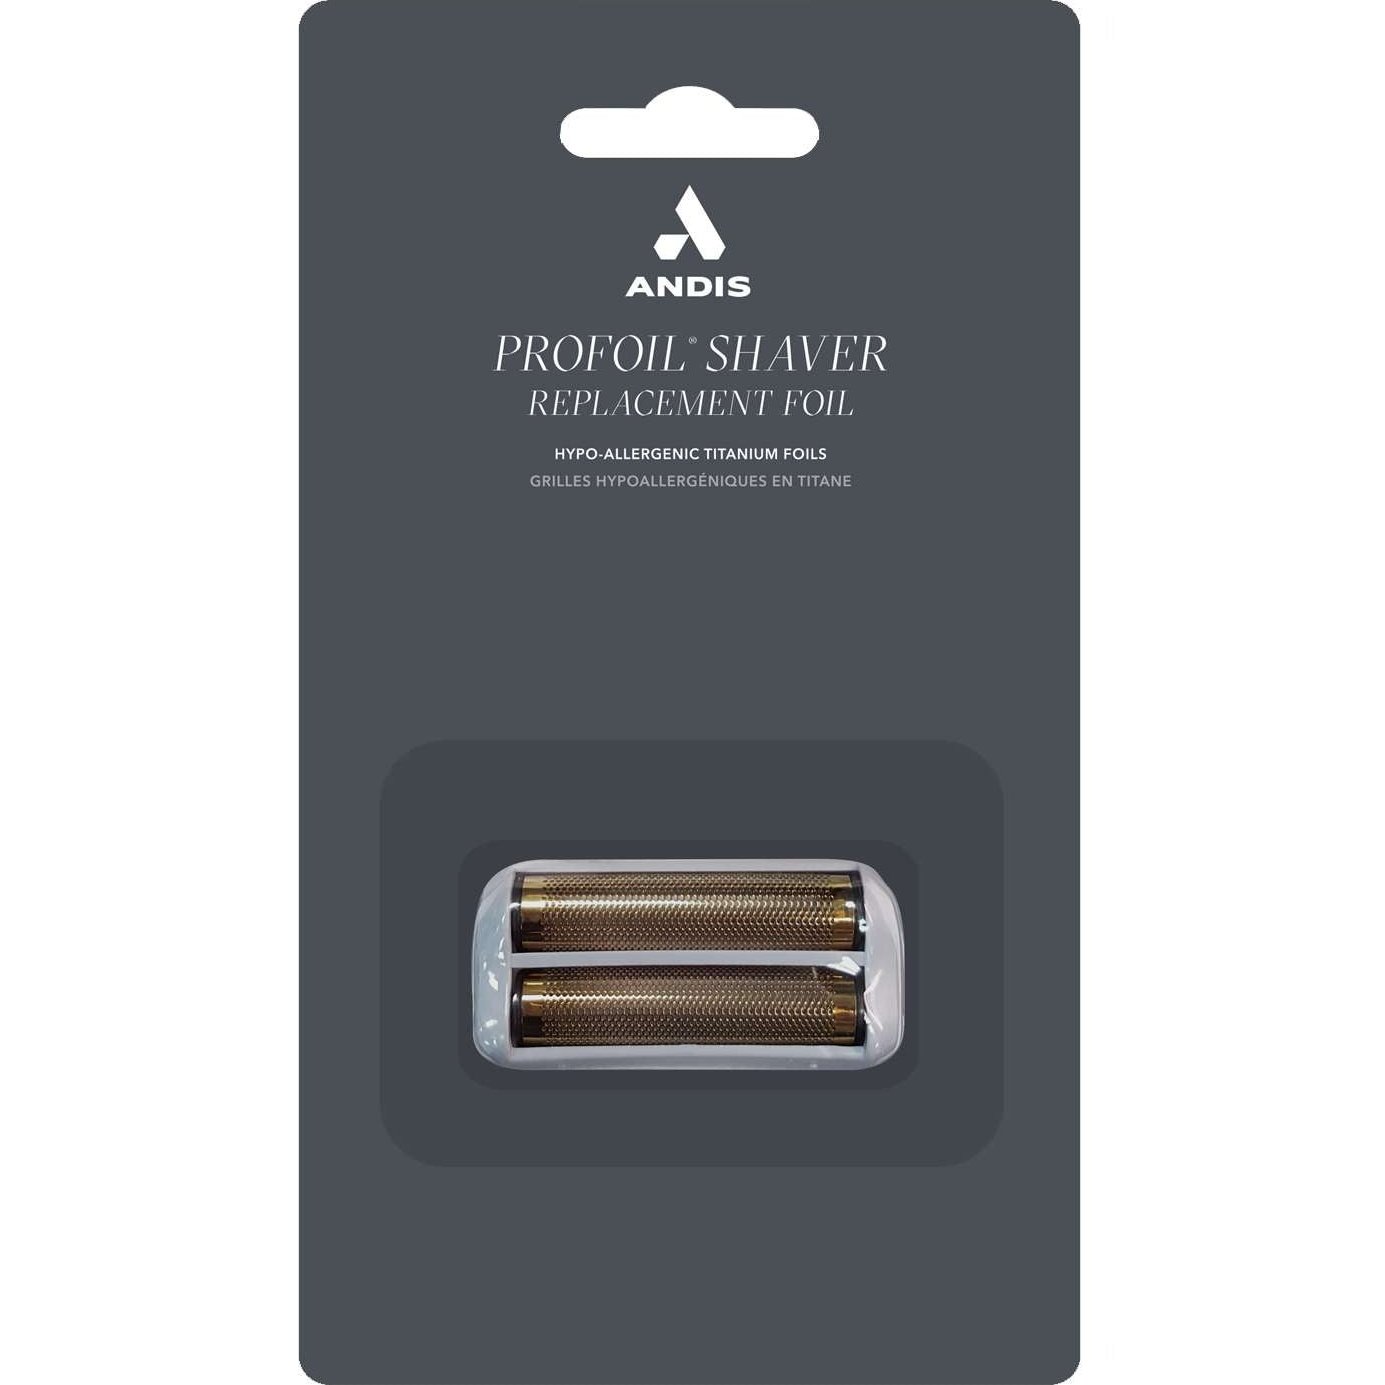 Andis Profoil Shaver Replacement Foil Only